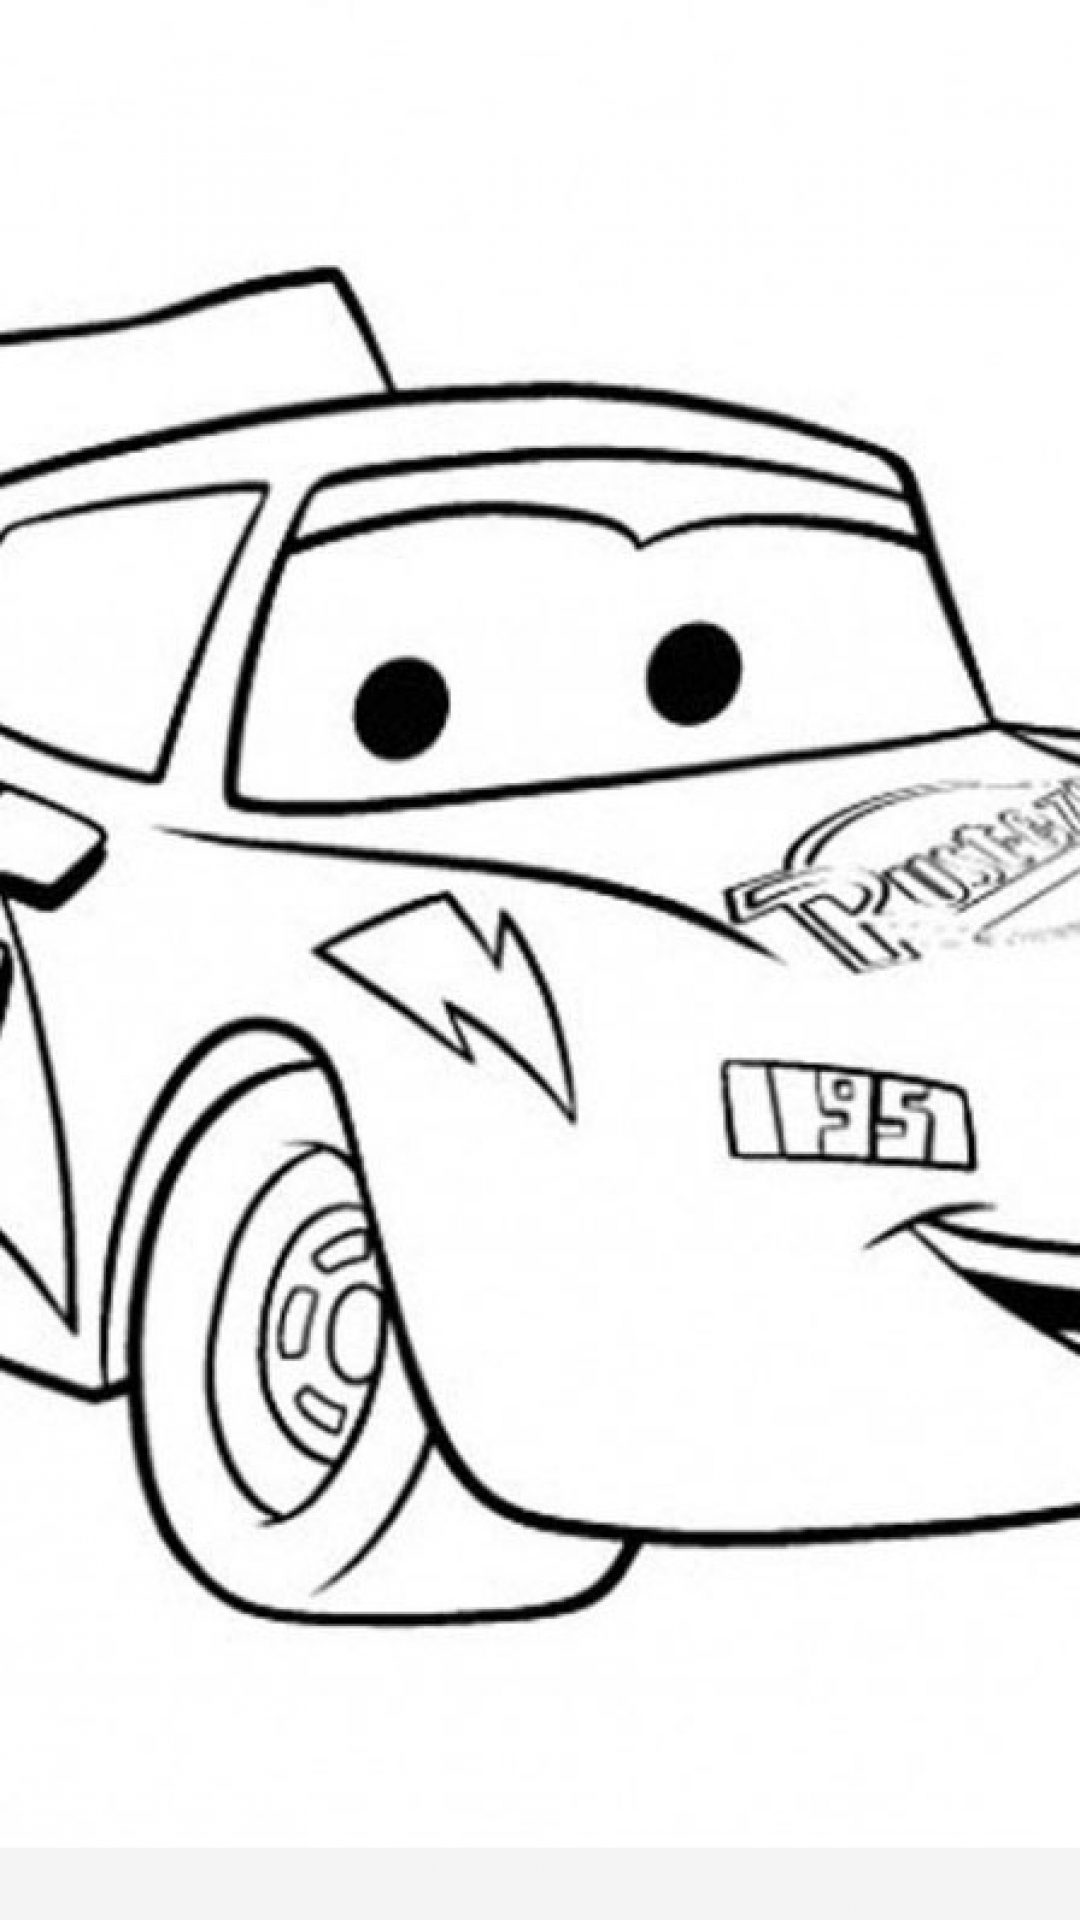 Cars Coloring Pages Pdf at Free